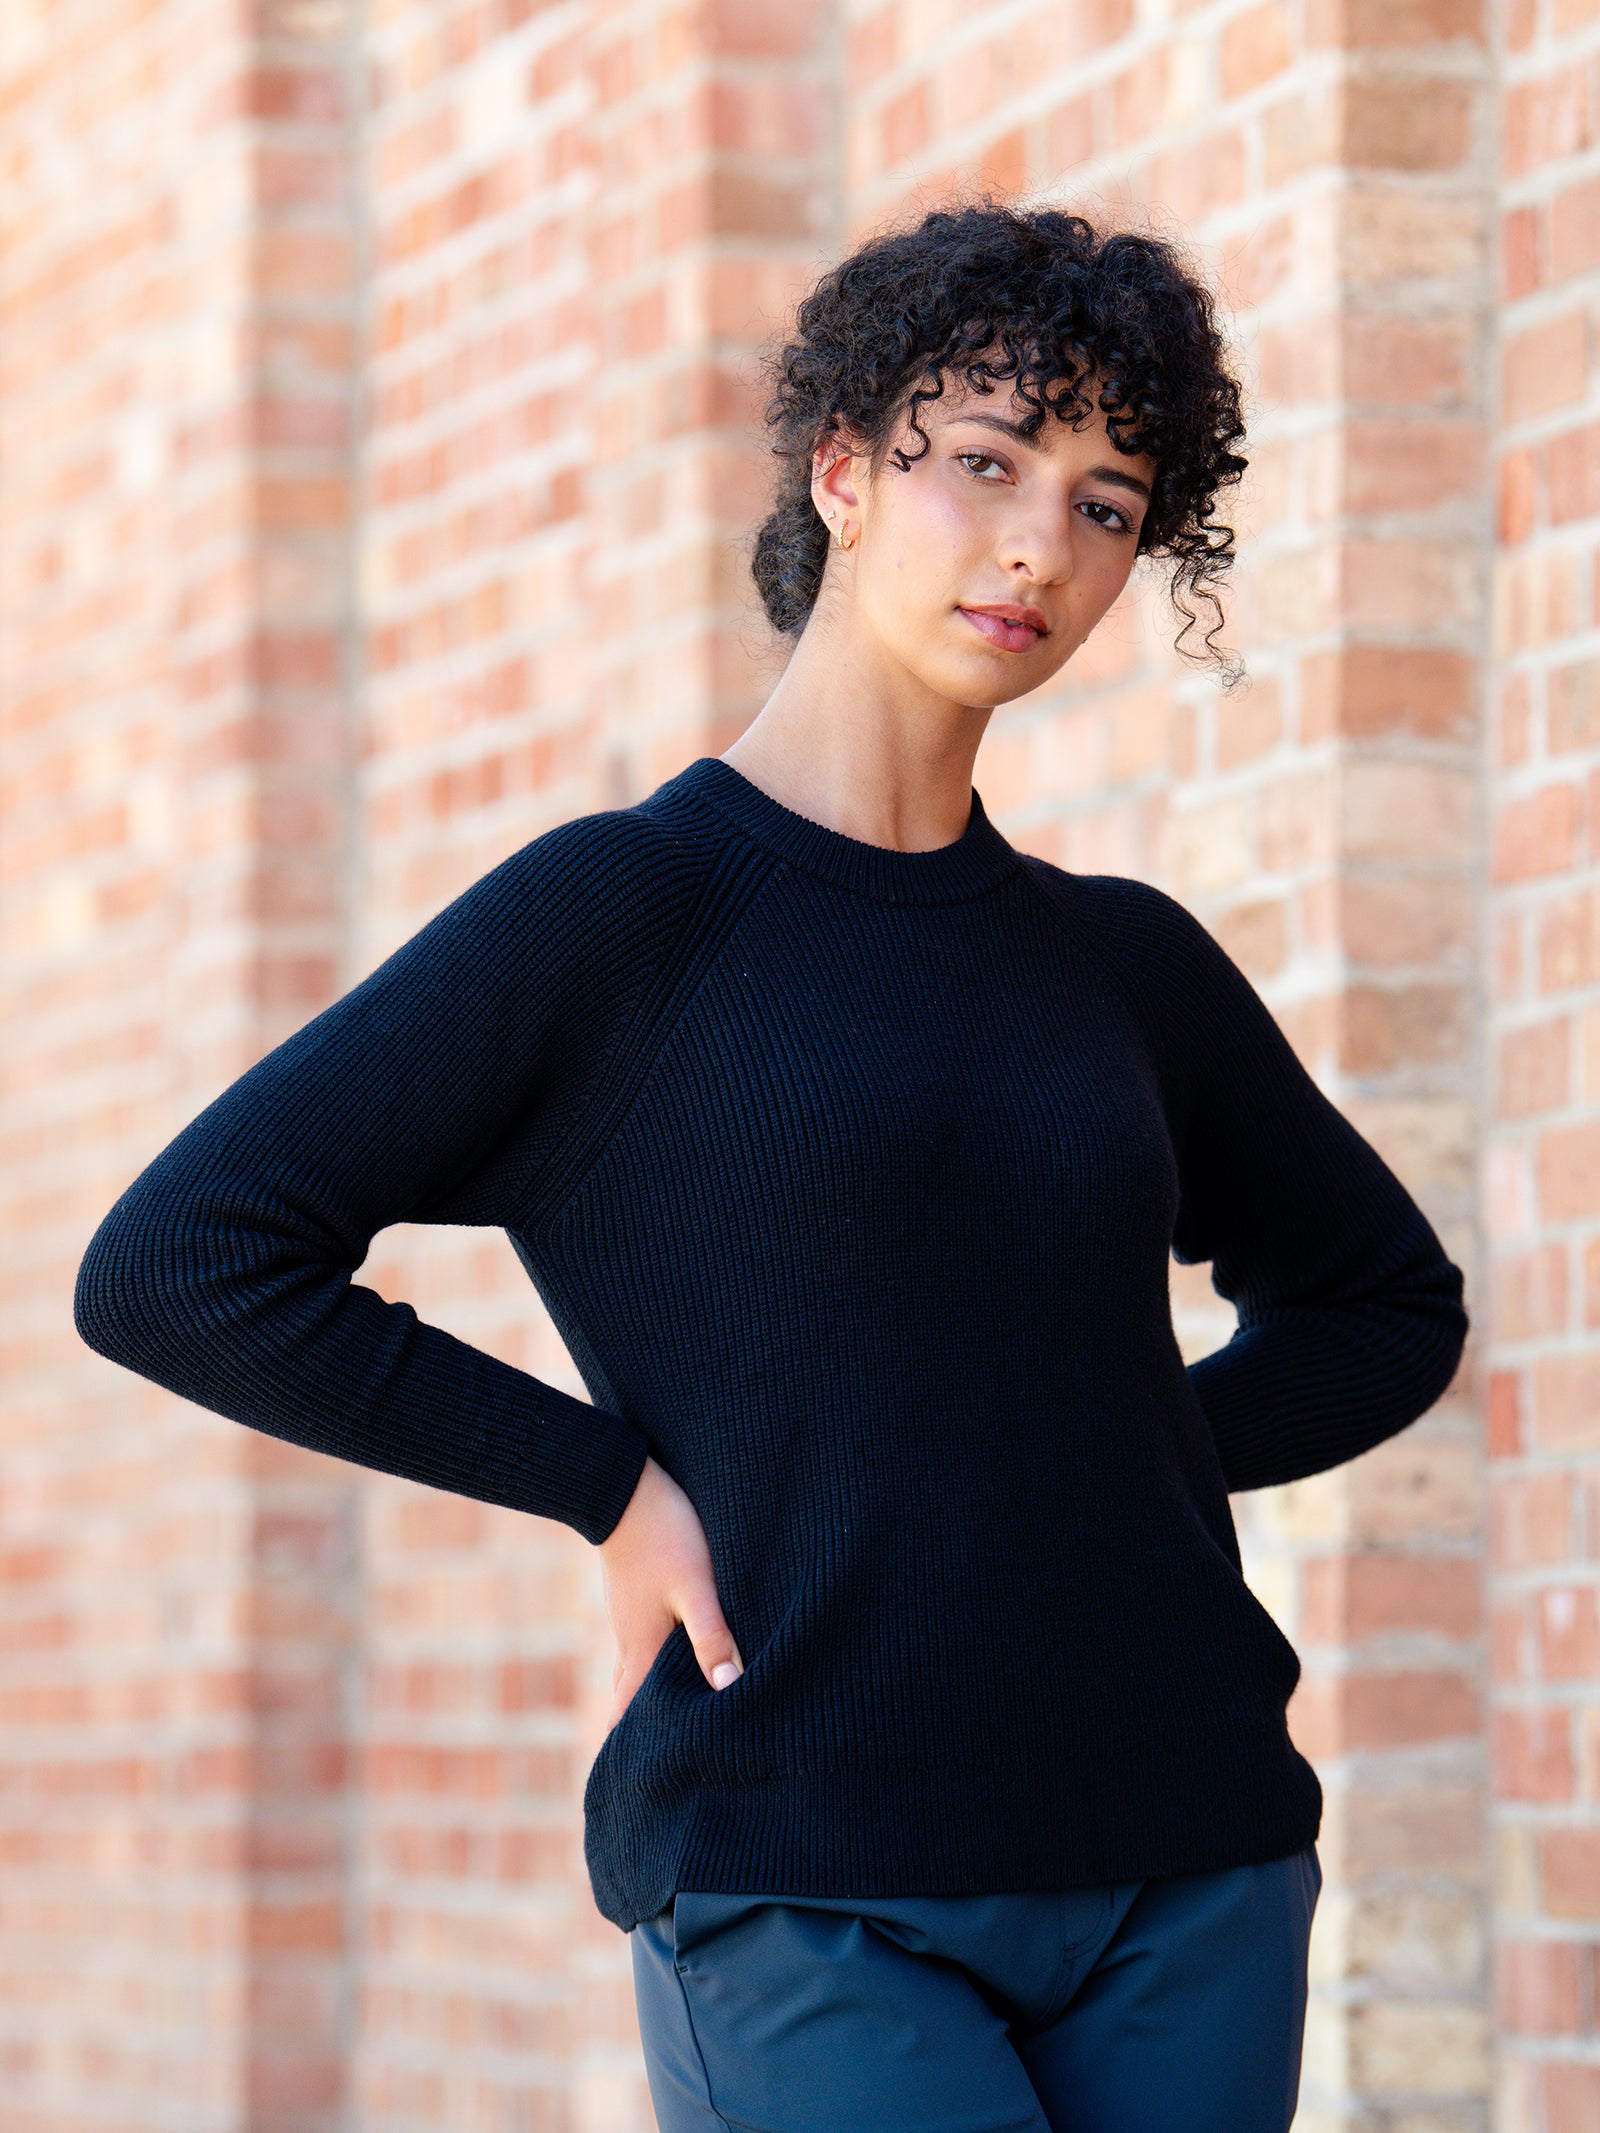 A person with curly hair stands against a brick wall, posing with one hand on their hip and the other by their side. They are wearing a Cozy Earth Women's Classic Crewneck and dark pants. The expression on their face is neutral. 